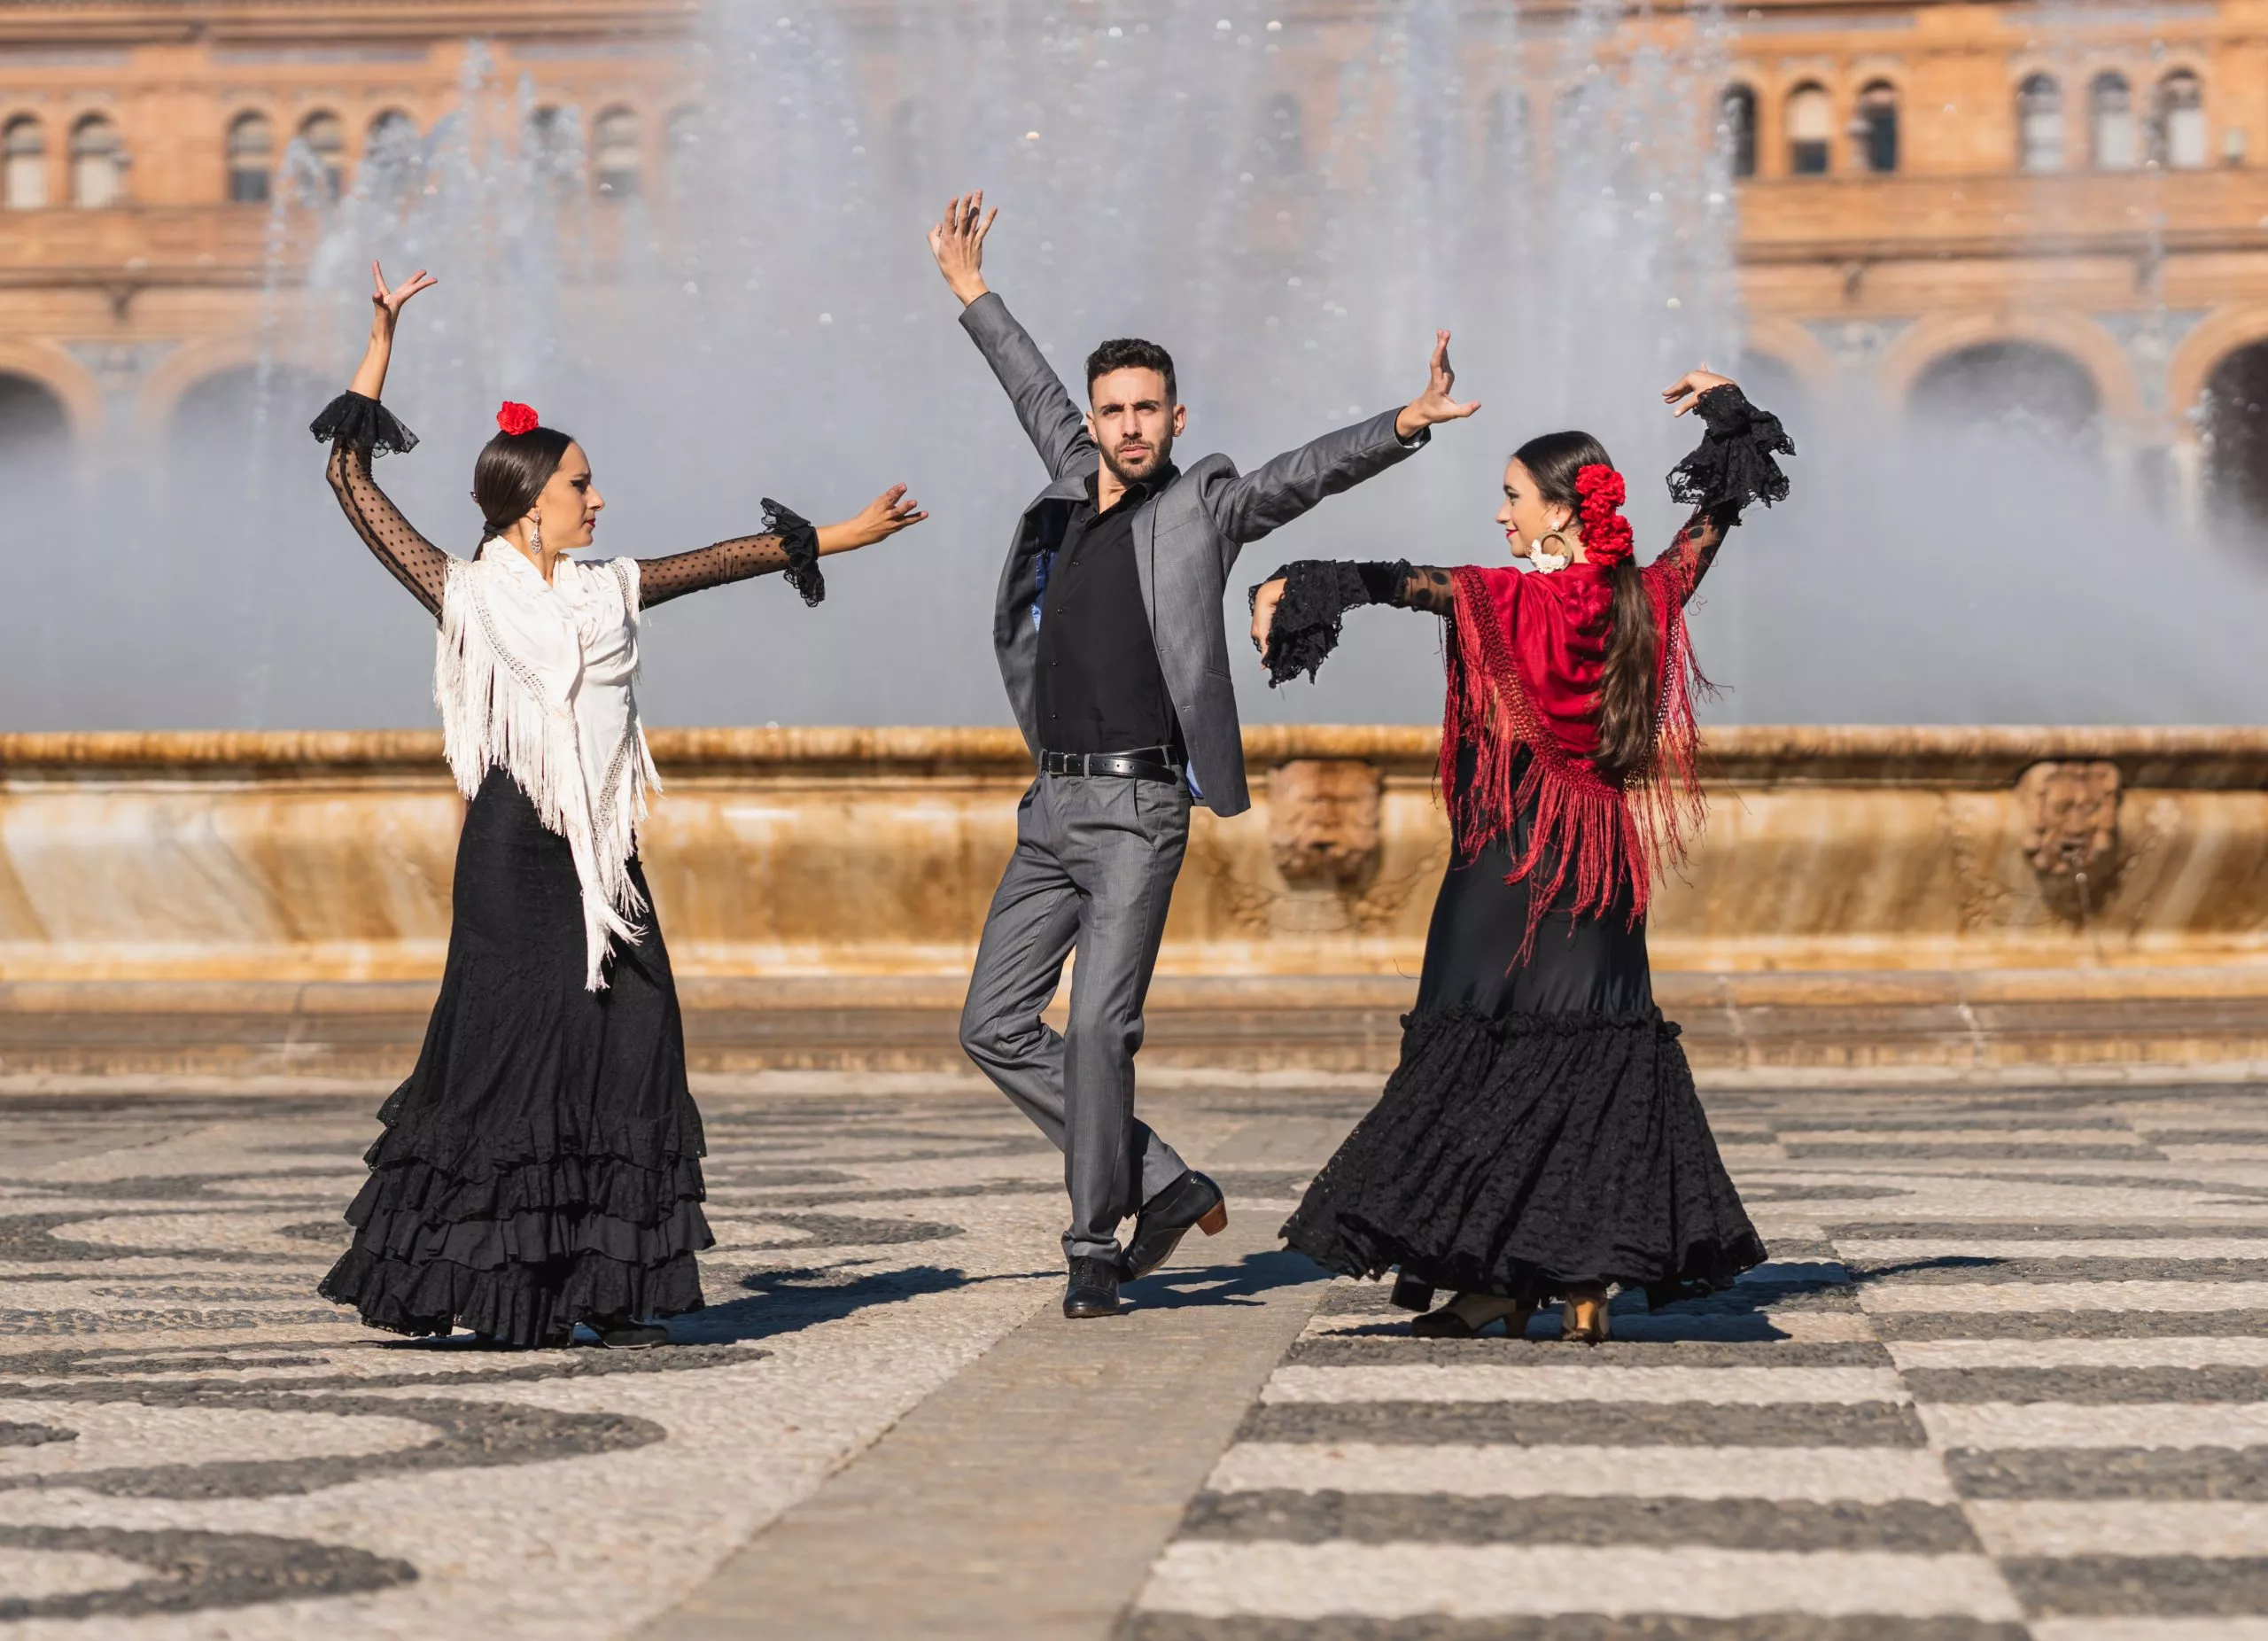 Three people with flamenco outfit dancing in the traditional square of Spain in Seville